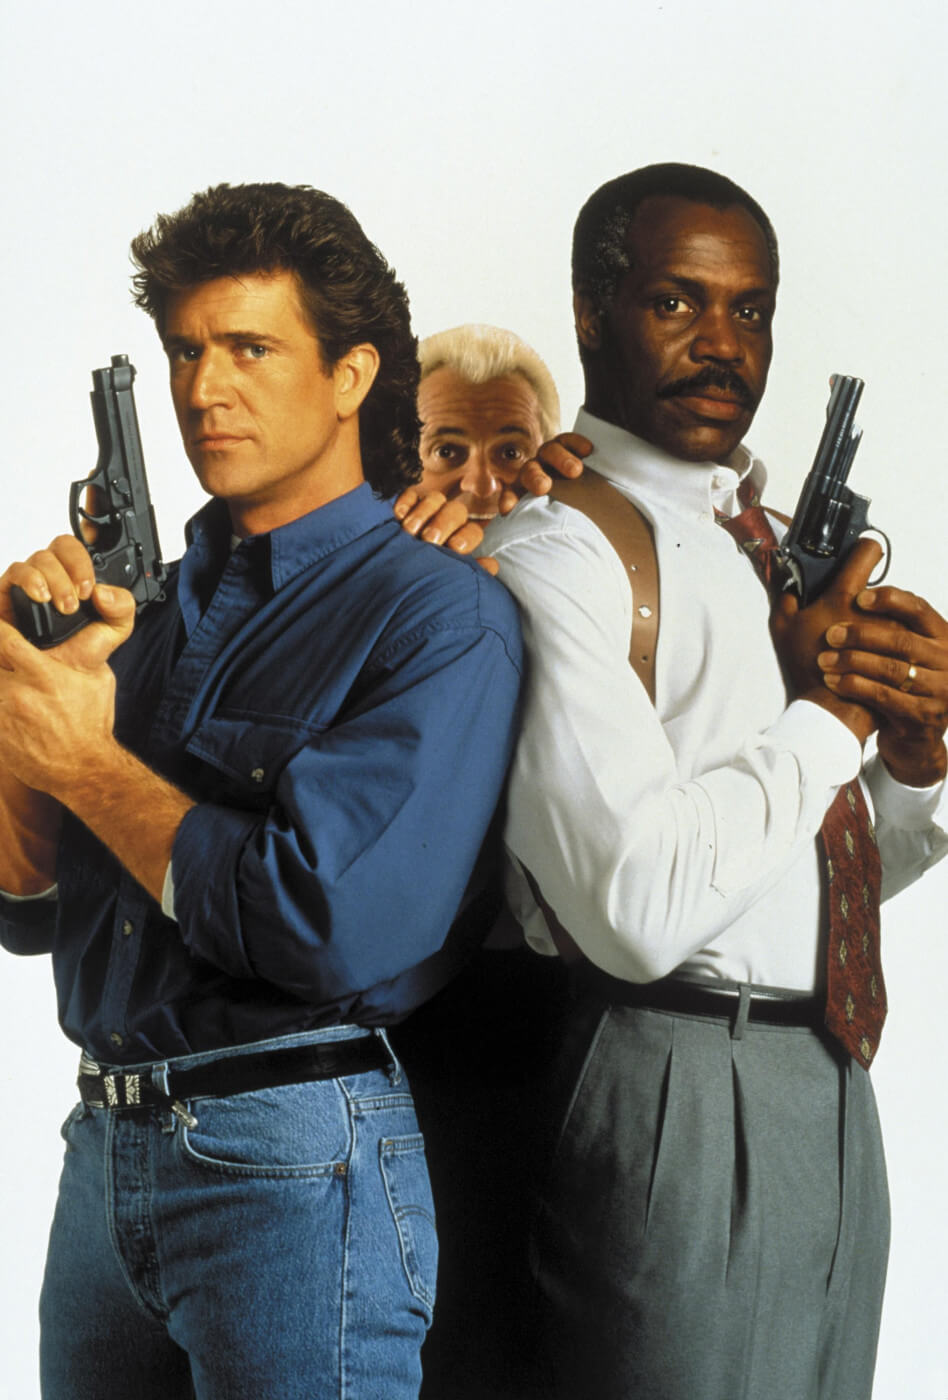 Ranking the Lethal Weapon Film Series 20220511 -Lethal Weapon 3 17